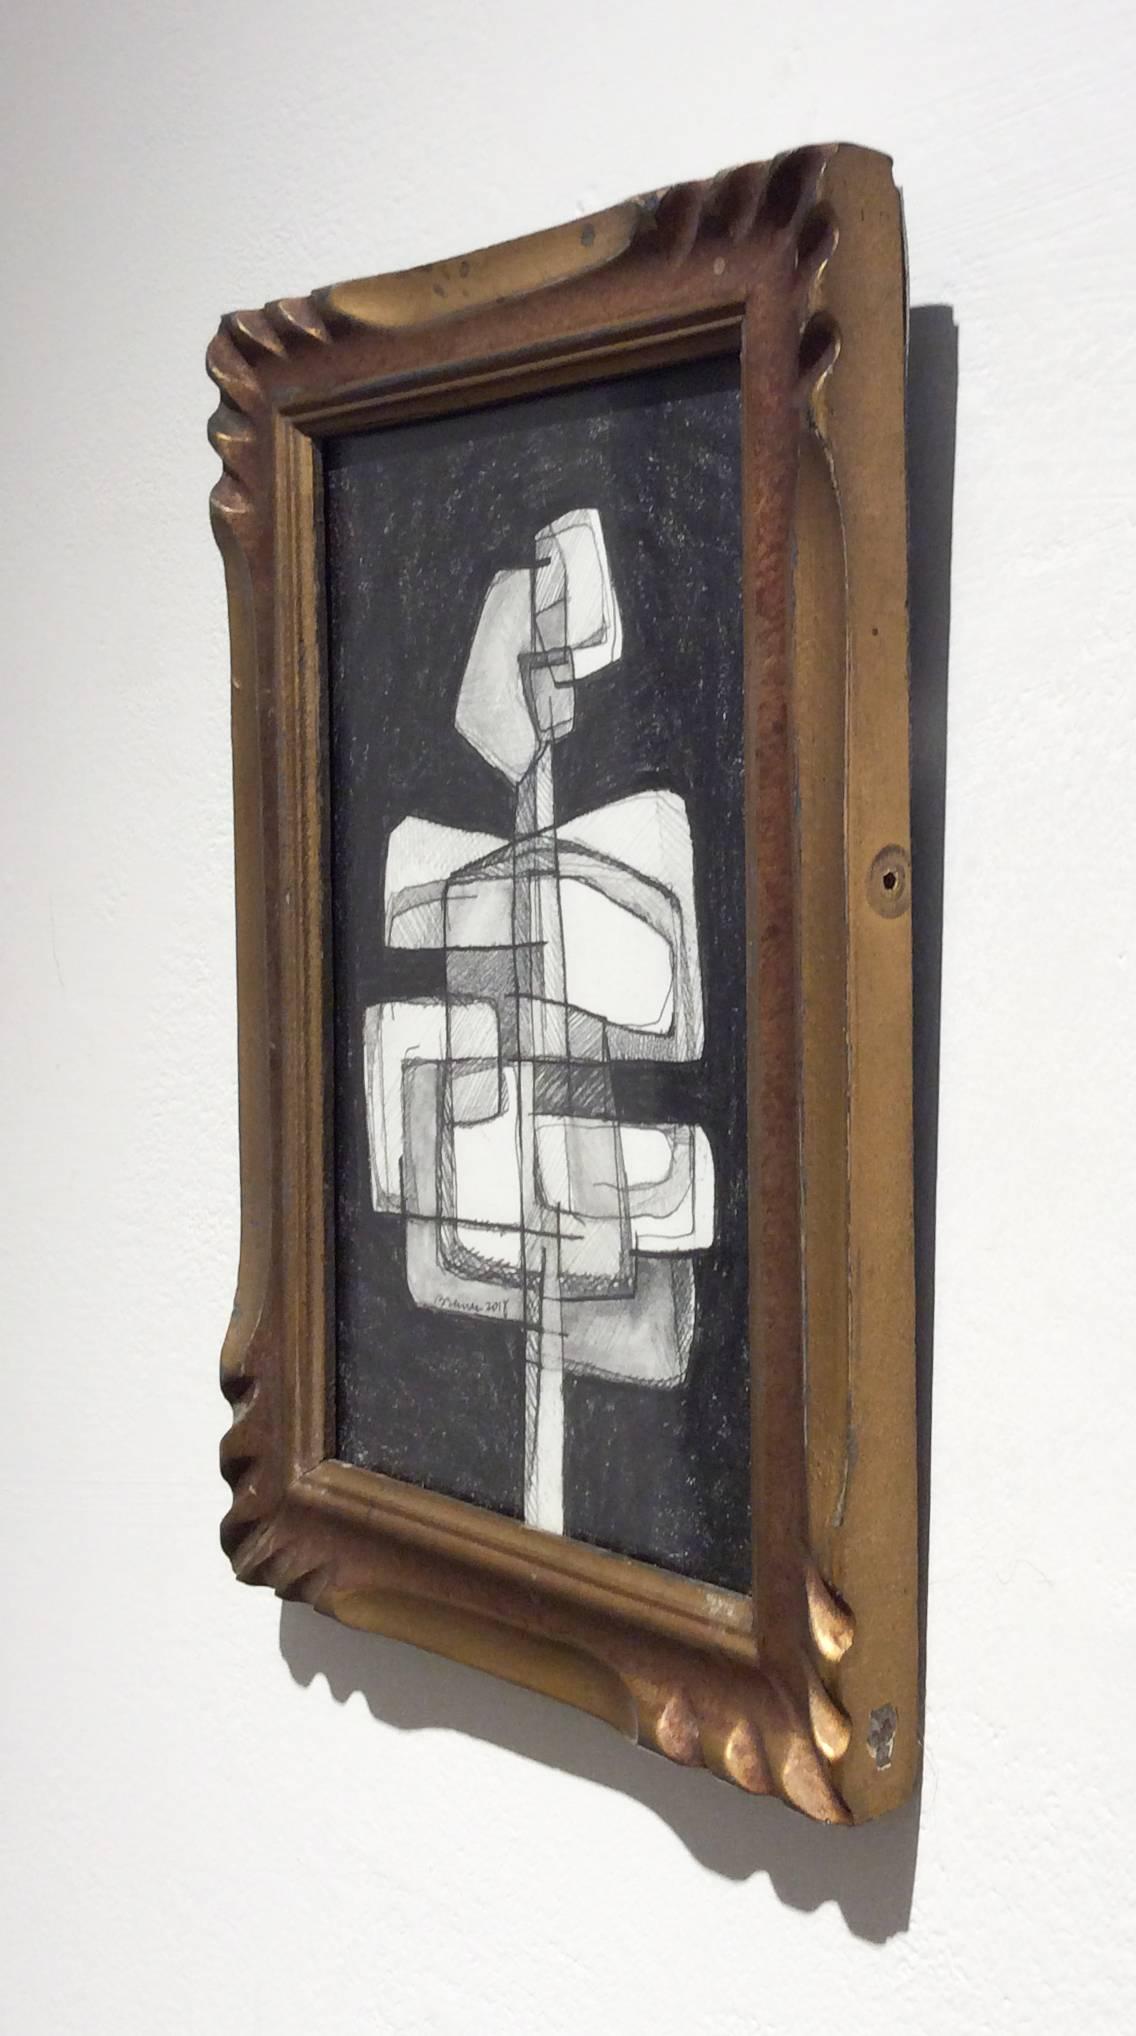 Infanta XLV (Small Abstract Figurative Graphite Drawing in Antique Wood Frame) - Art by David Dew Bruner